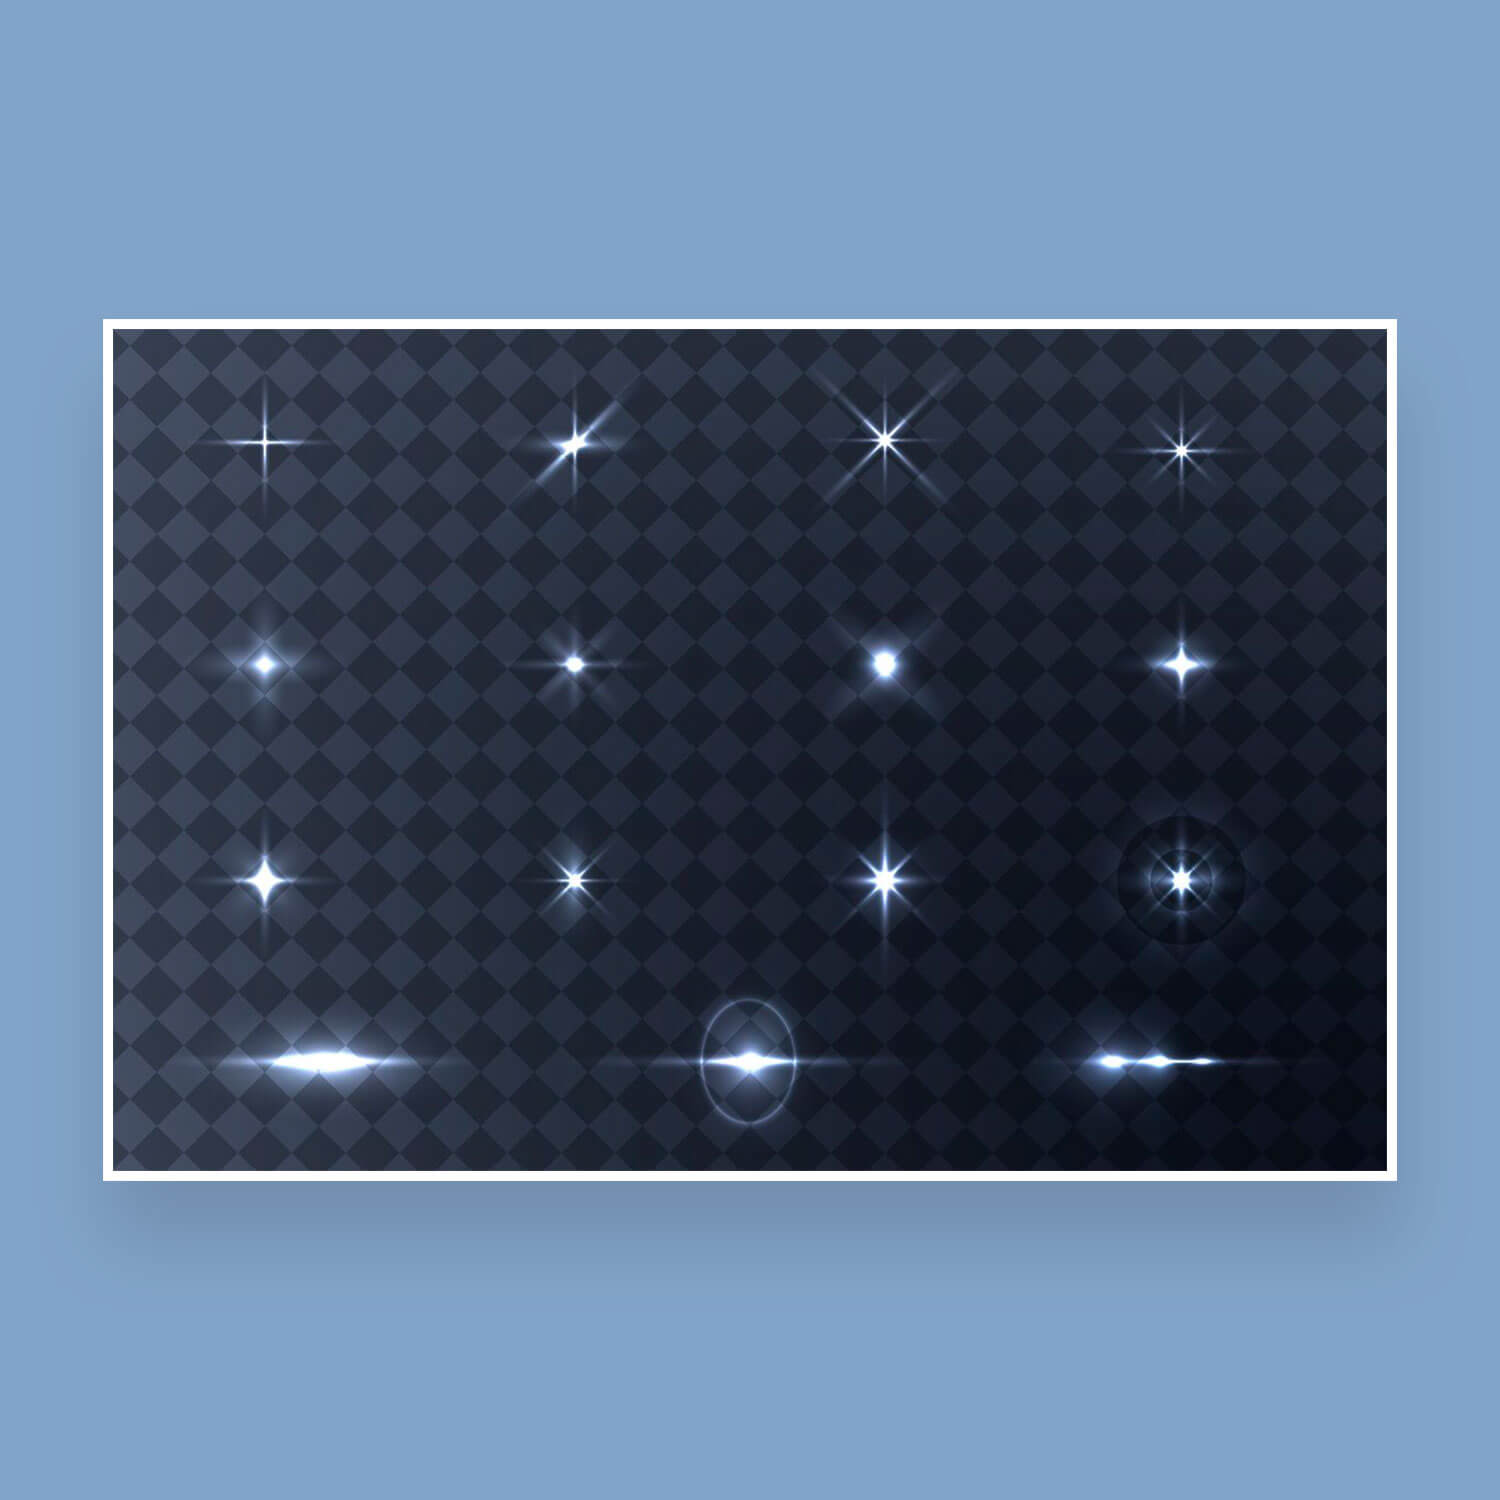 Image of light effects on a dark blue background.